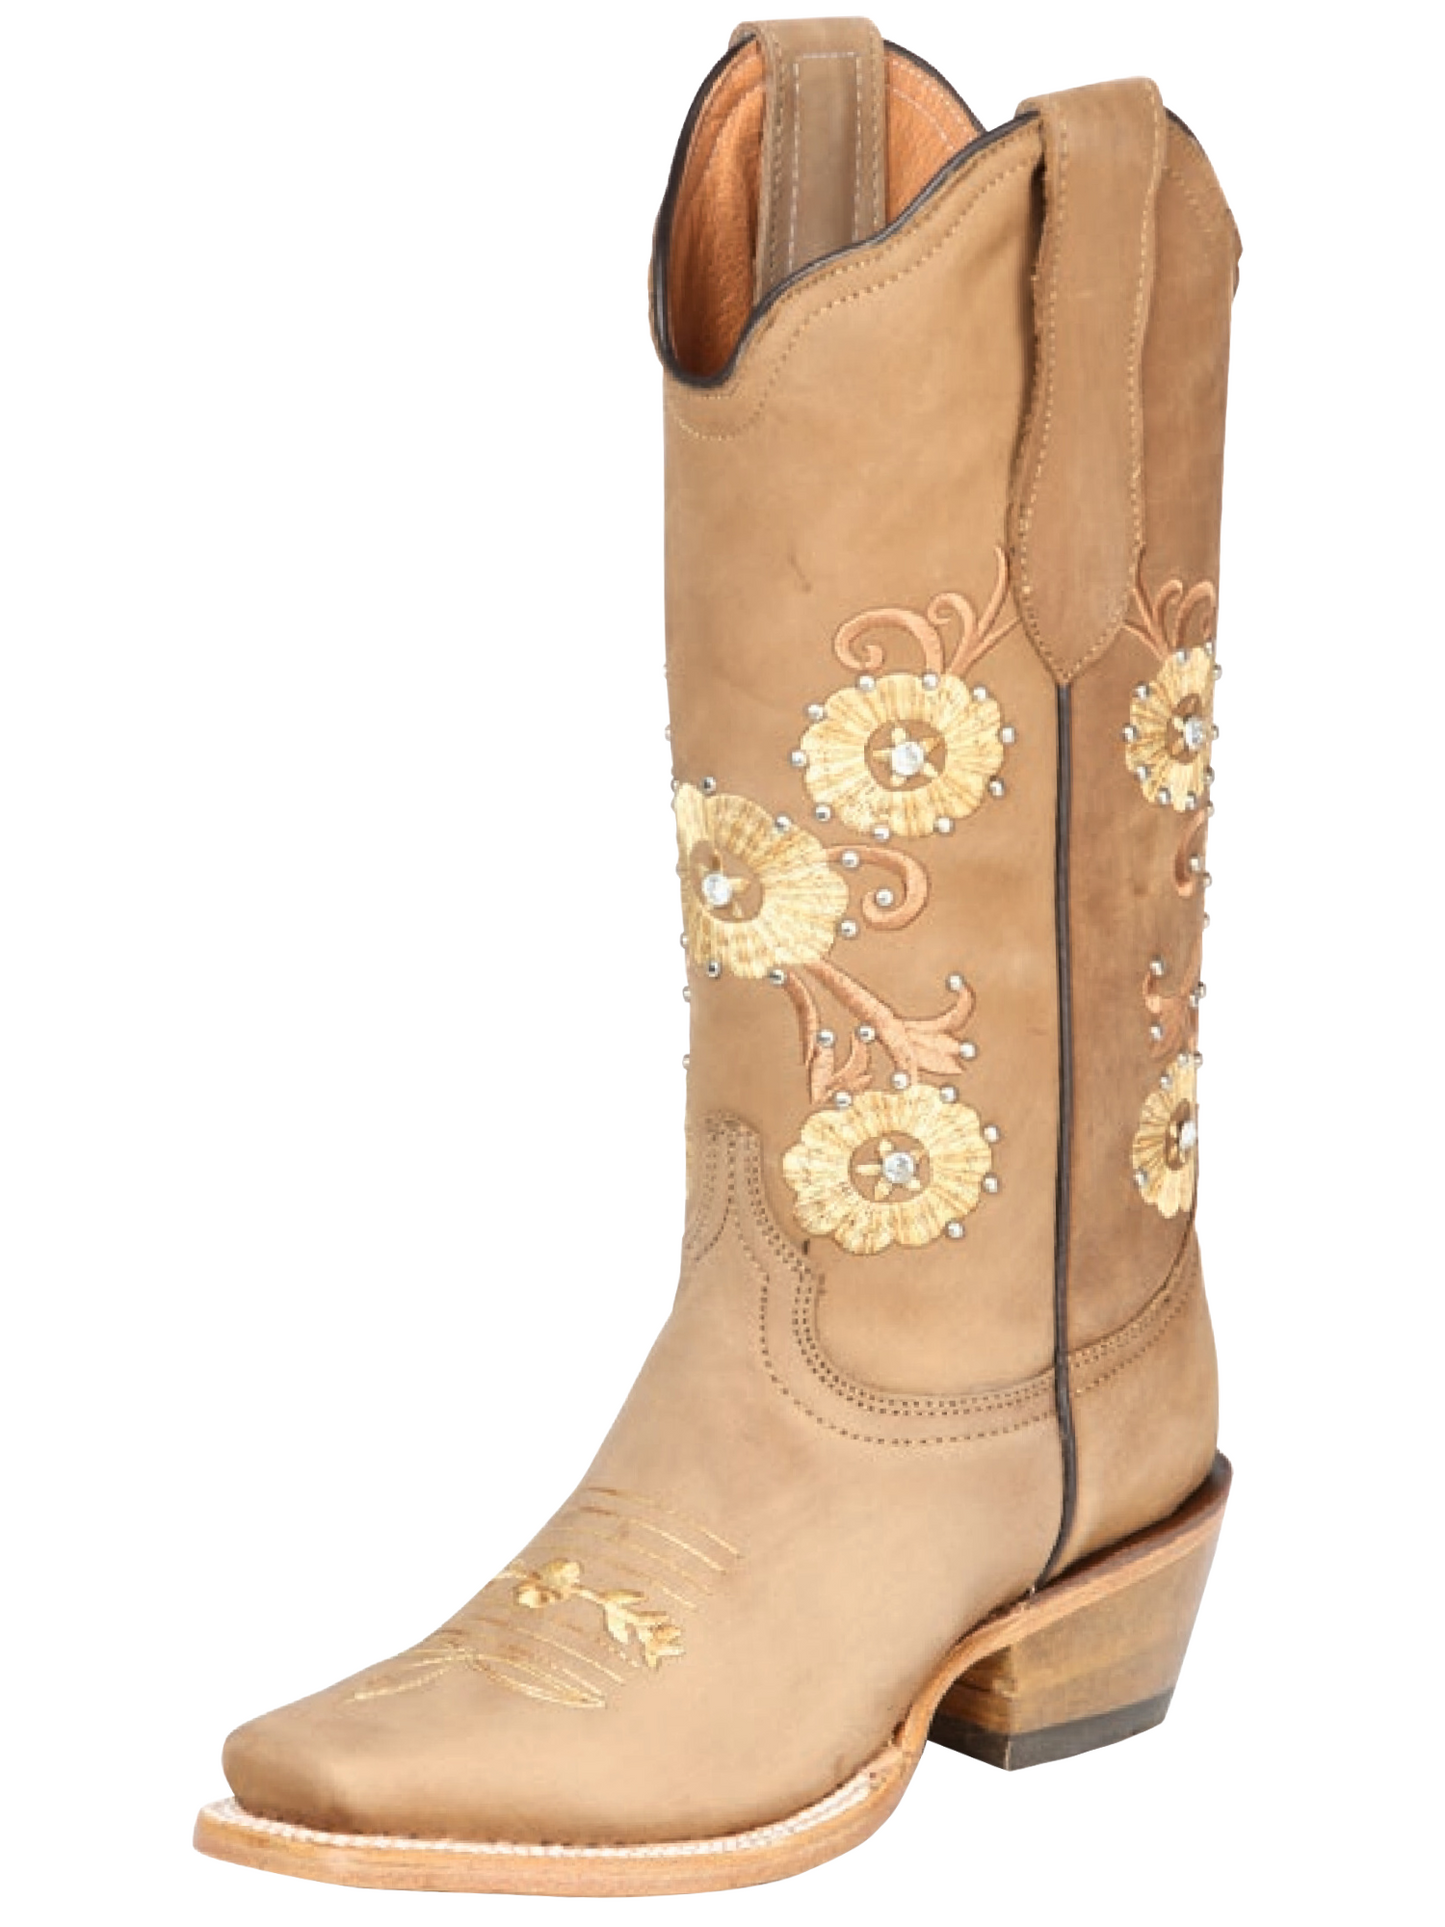 Rodeo Cowboy Boots with Genuine Leather Flower Embroidered Tube for Women 'Jar Boots' - ID: 126450